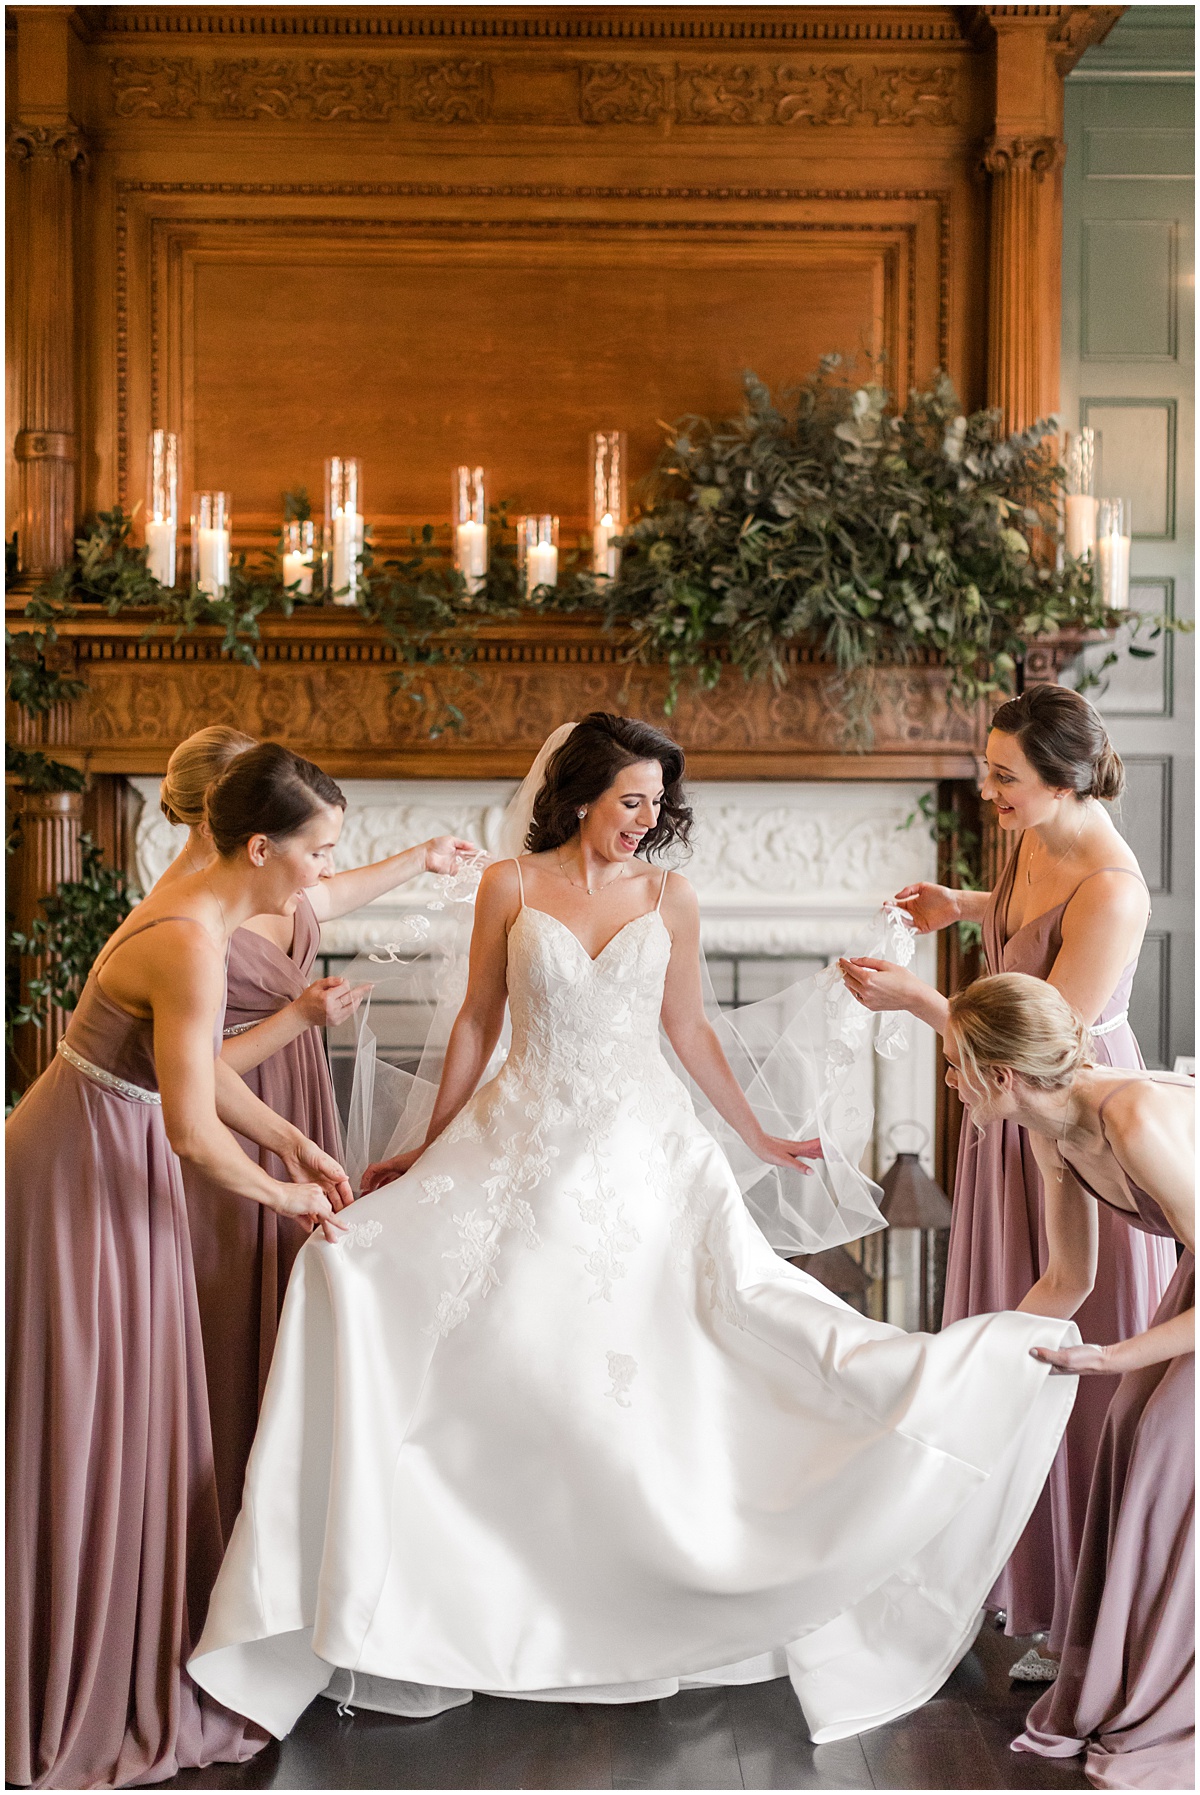 Mauve bridesmaid dresses getting ready with the bride